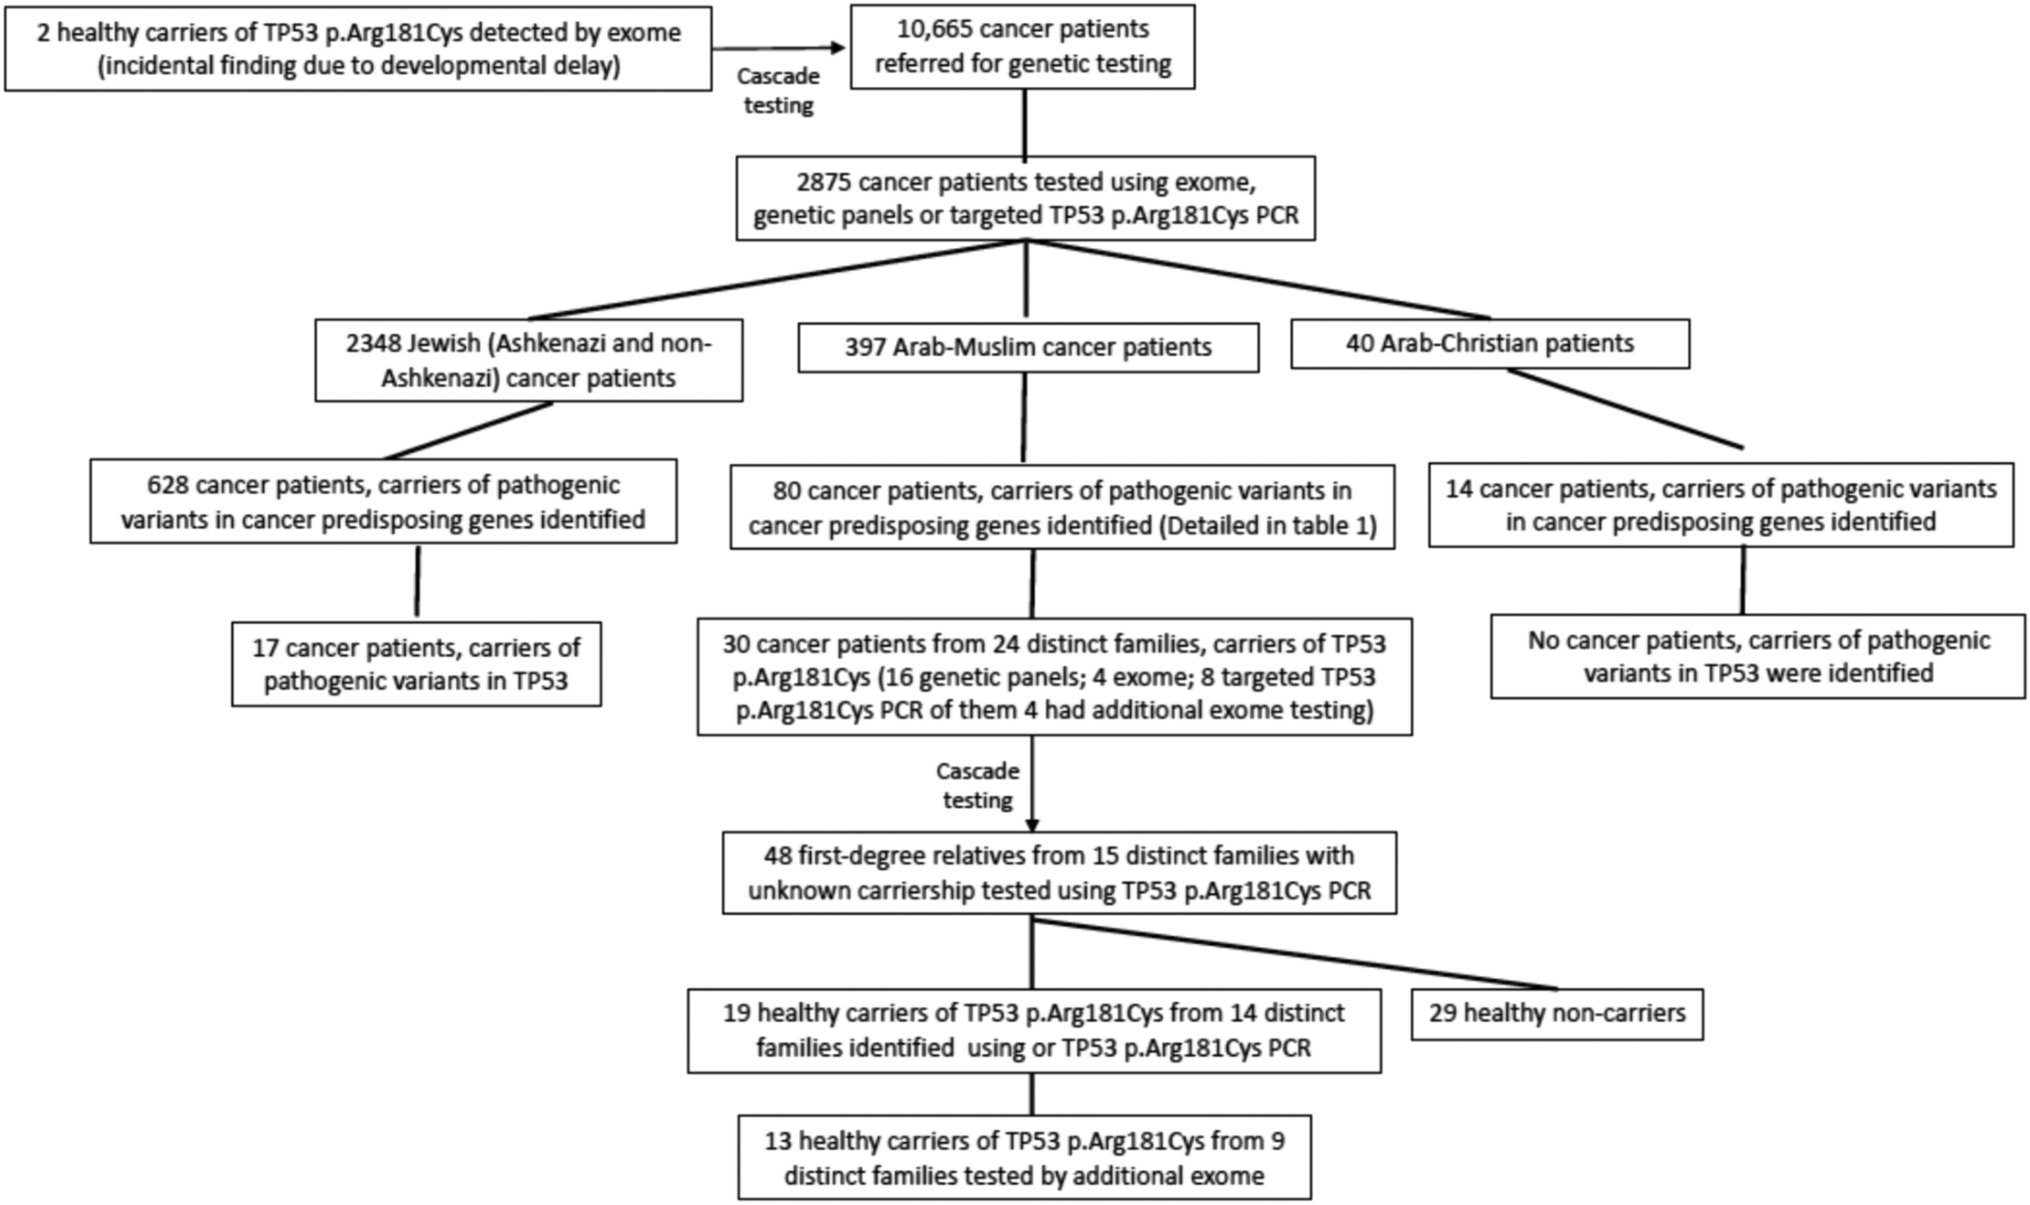 Clinical and genetic characteristics of carriers of the TP53 c.541C > T, p.Arg181Cys pathogenic variant causing hereditary cancer in patients of Arab-Muslim descent